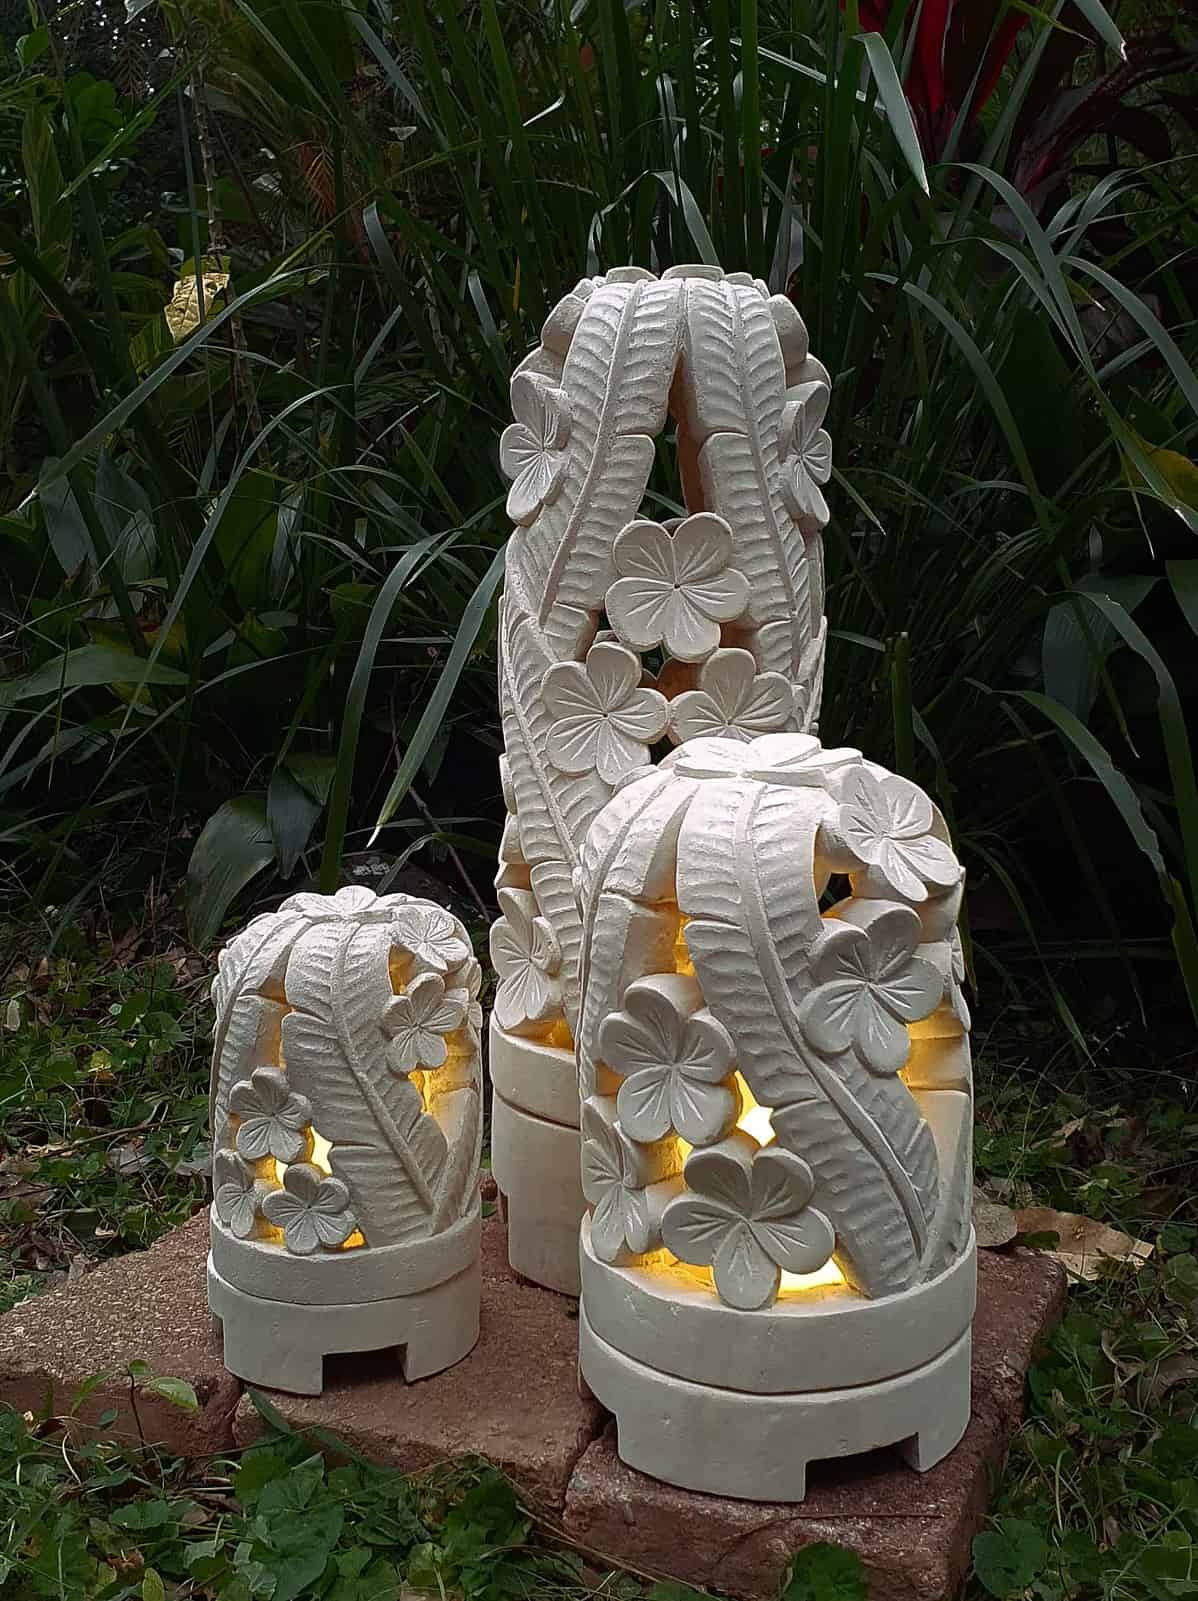 Limestone Garden Lights- FRANGIPANI design- in 3 sizes. Limestone lanterns are great for interior or outdoor spaces, can be powered or candlelight.